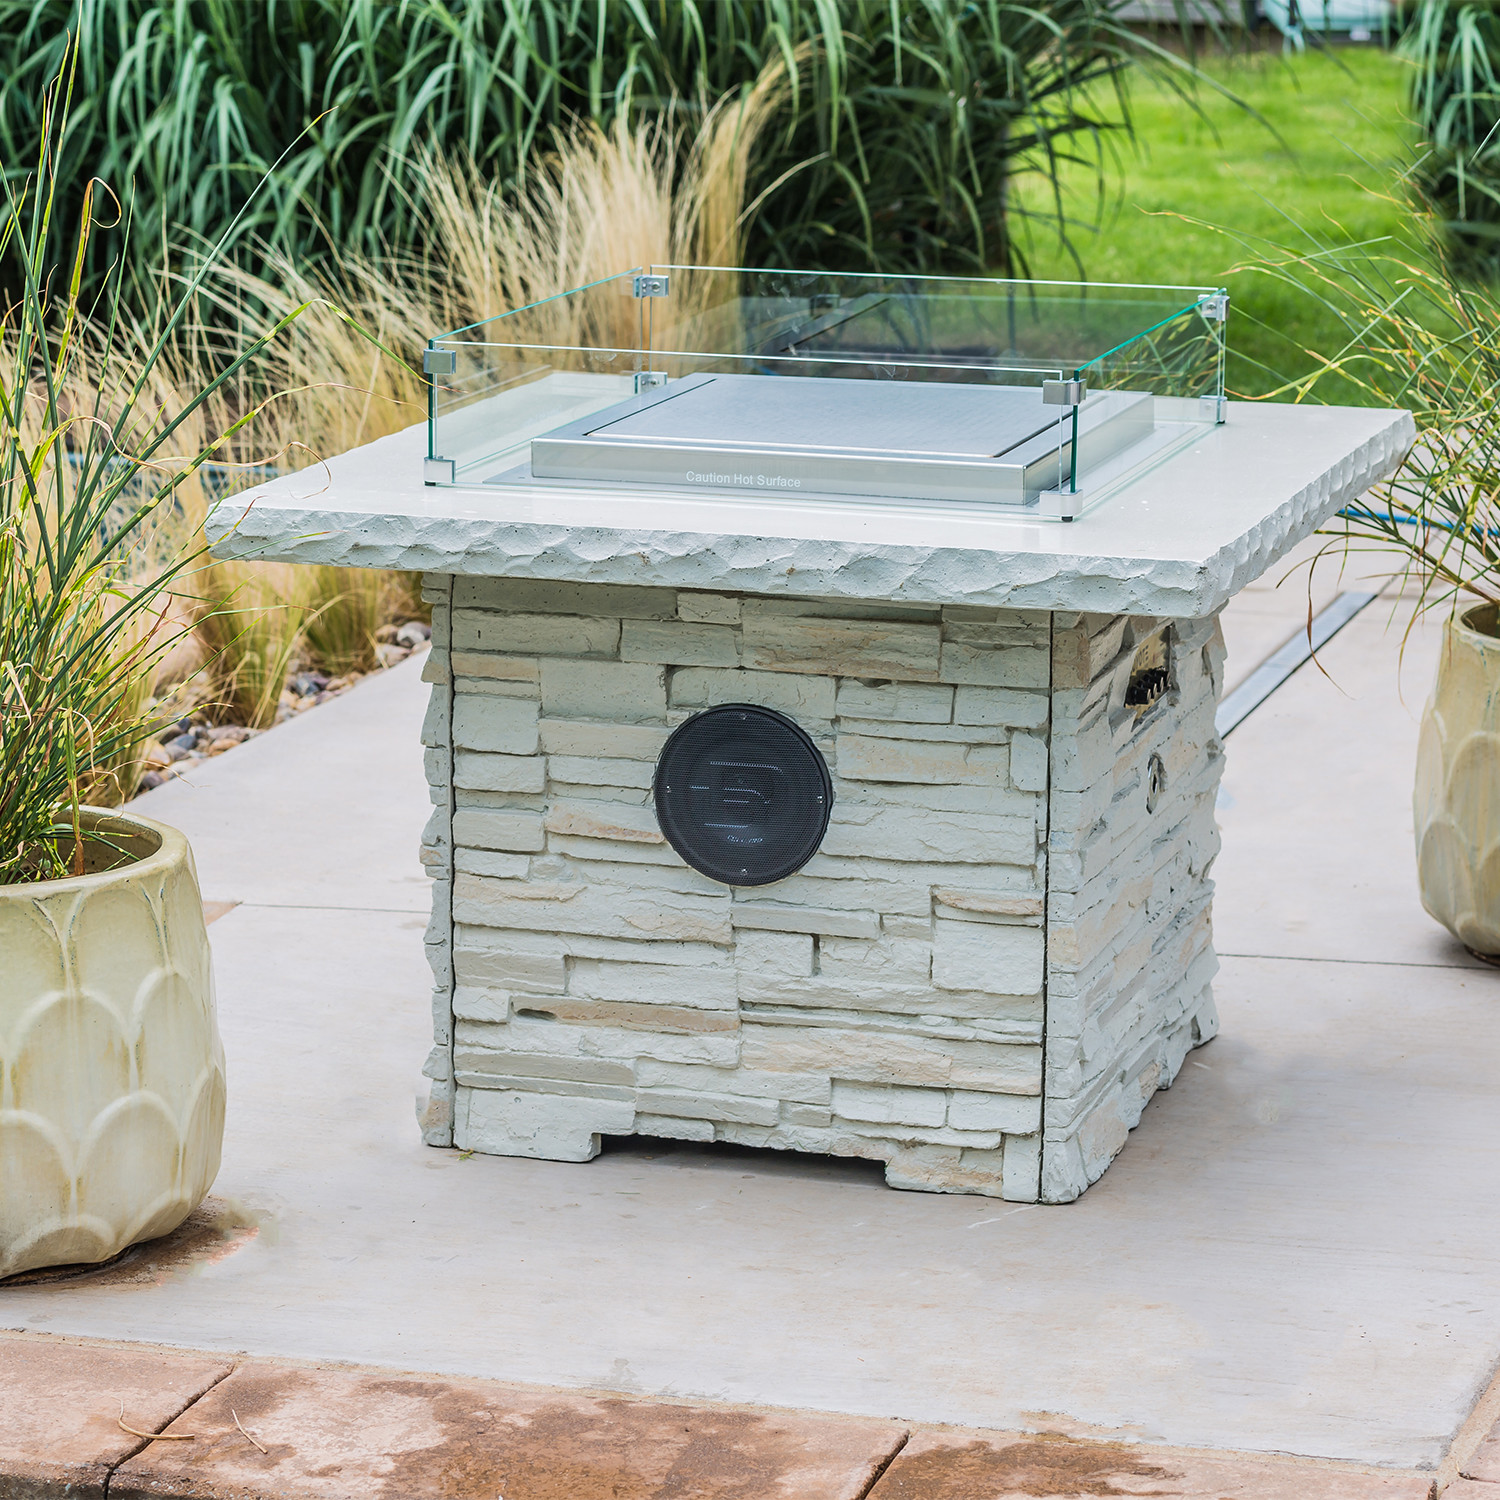 Dancing Fire Pit Wind Guard The, Blazing Beats Fire Pit Cost